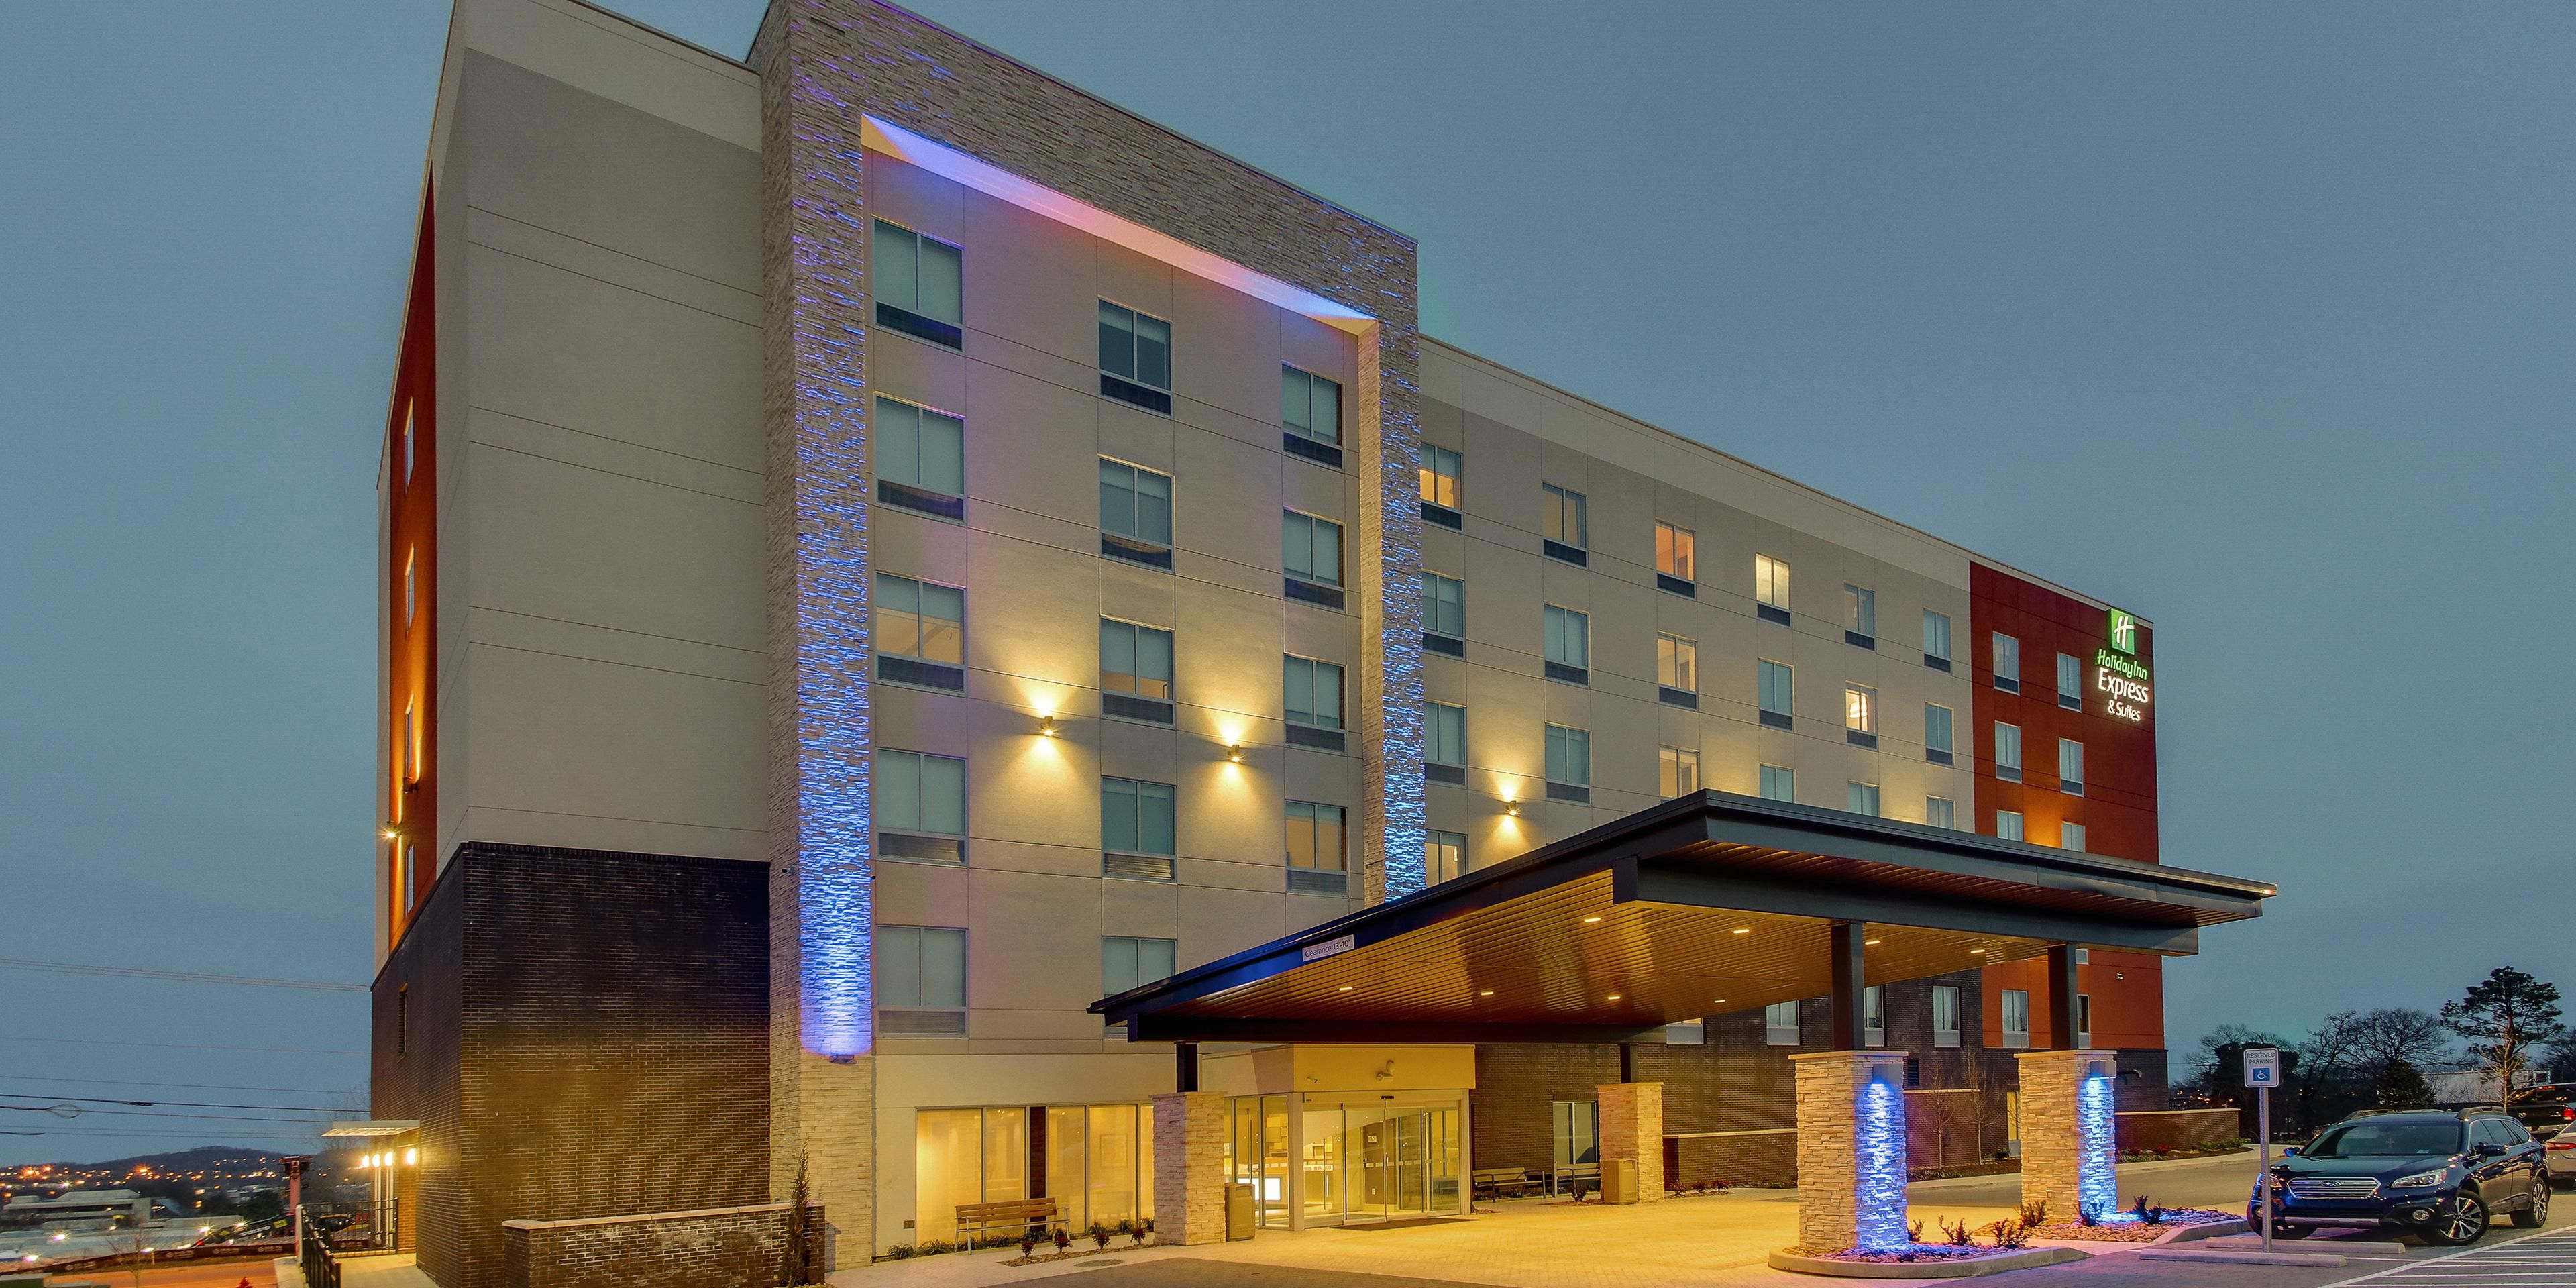 Newly opened hotel just a short drive to Bridgestone Arena, Broadway, and other main attractions. Close enough to enjoy the Nashville scene in a quick ride share but far enough to enjoy a peaceful nights rest. 